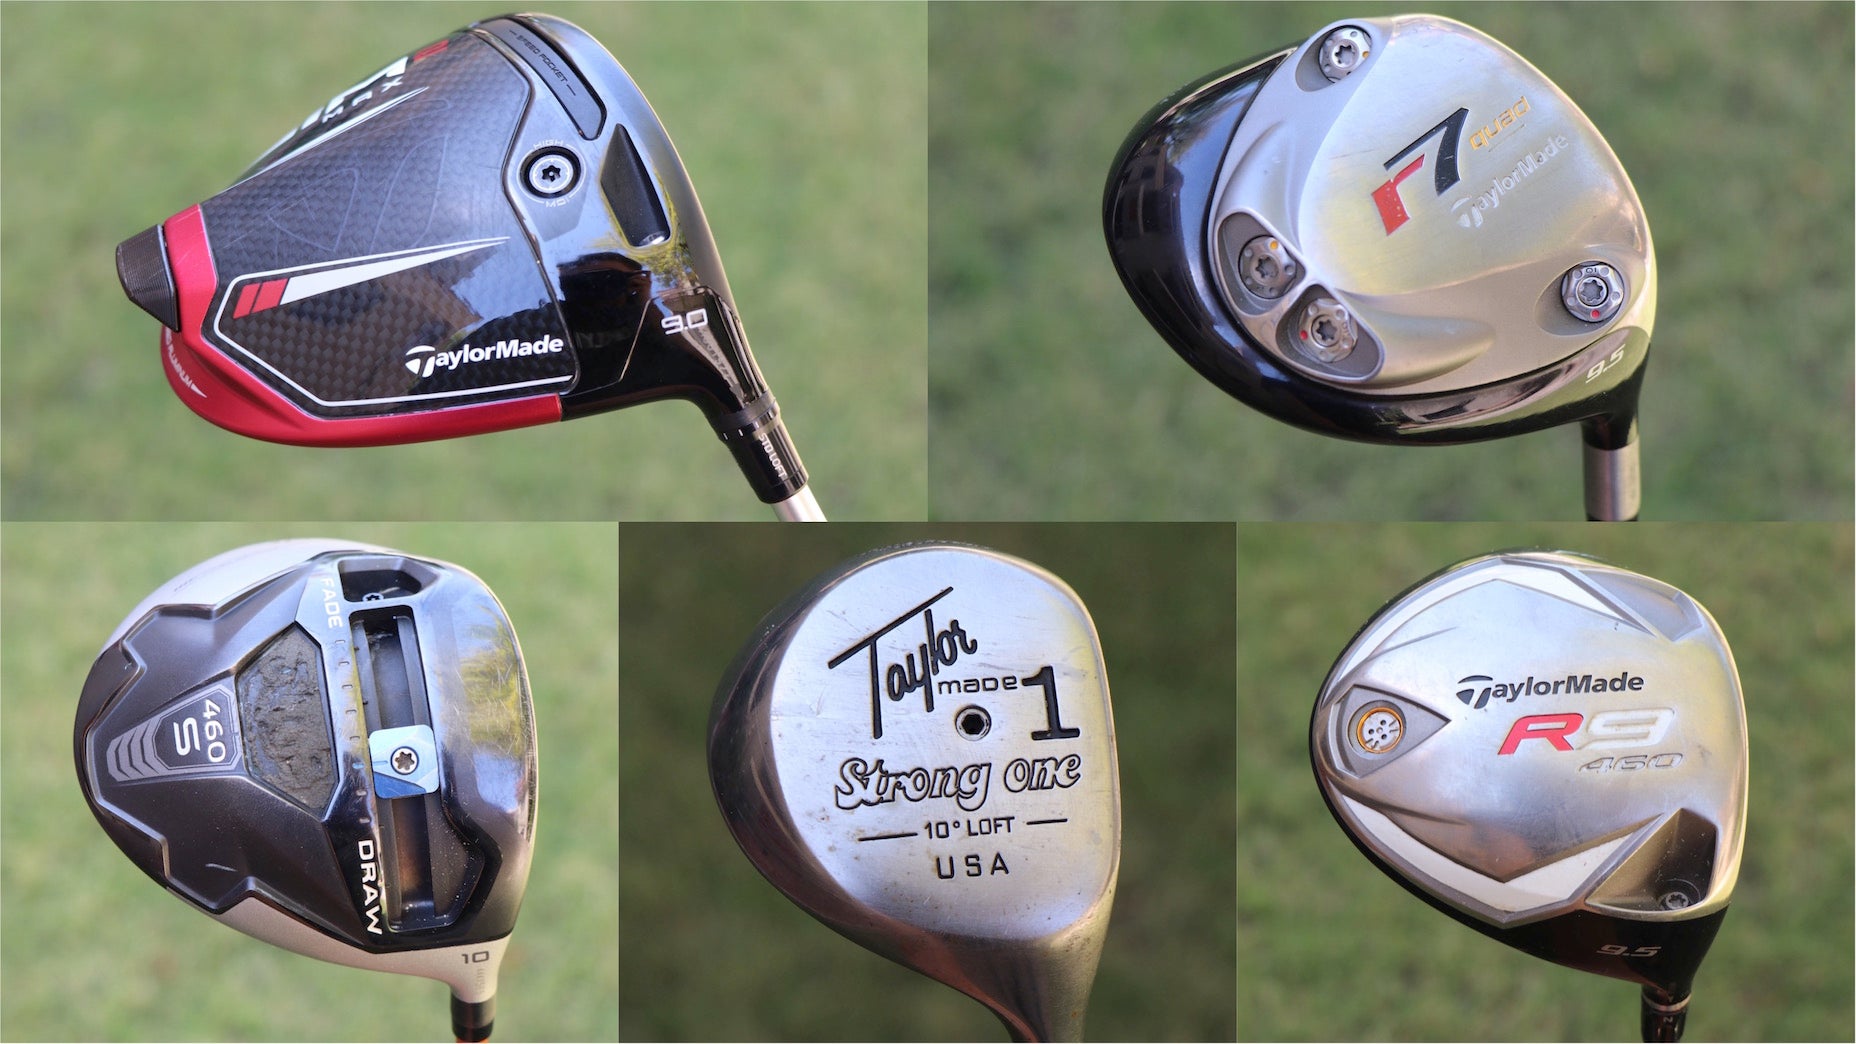 5 obvious signs that tell you it's time to buy new golf clubs